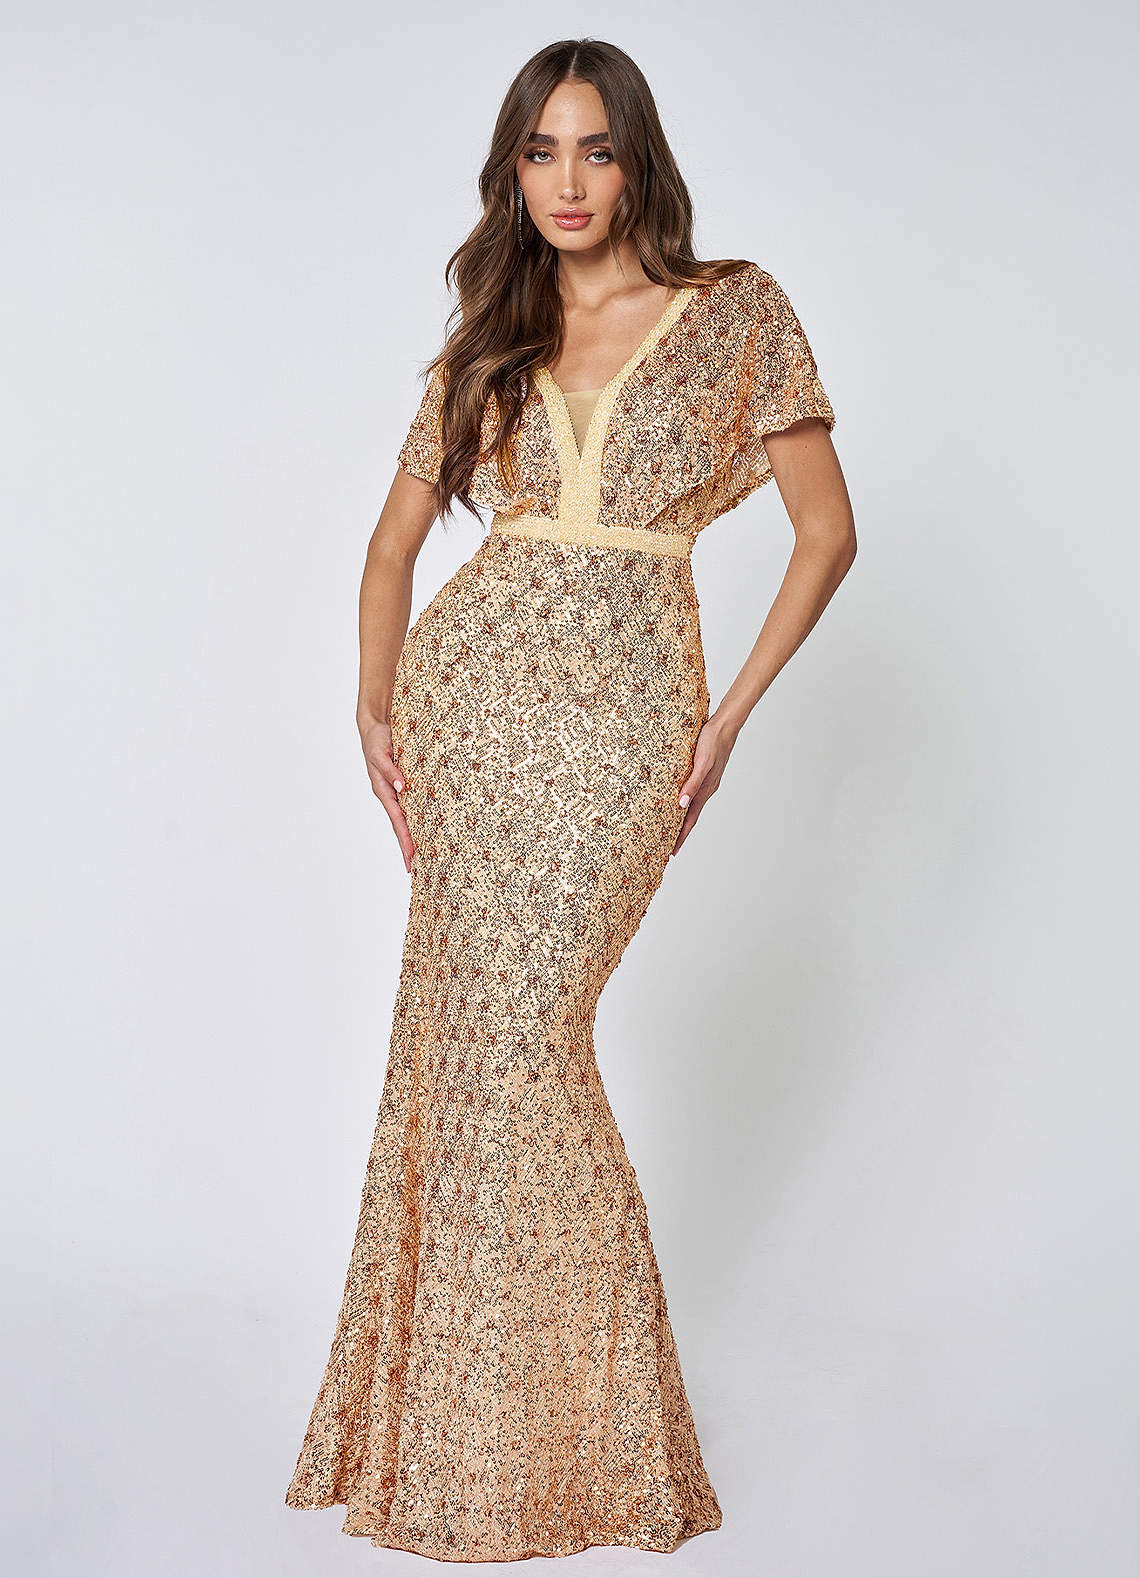 Champagne Love Lasts Forever Champagne Sequin Long Sleeve Maxi Dress